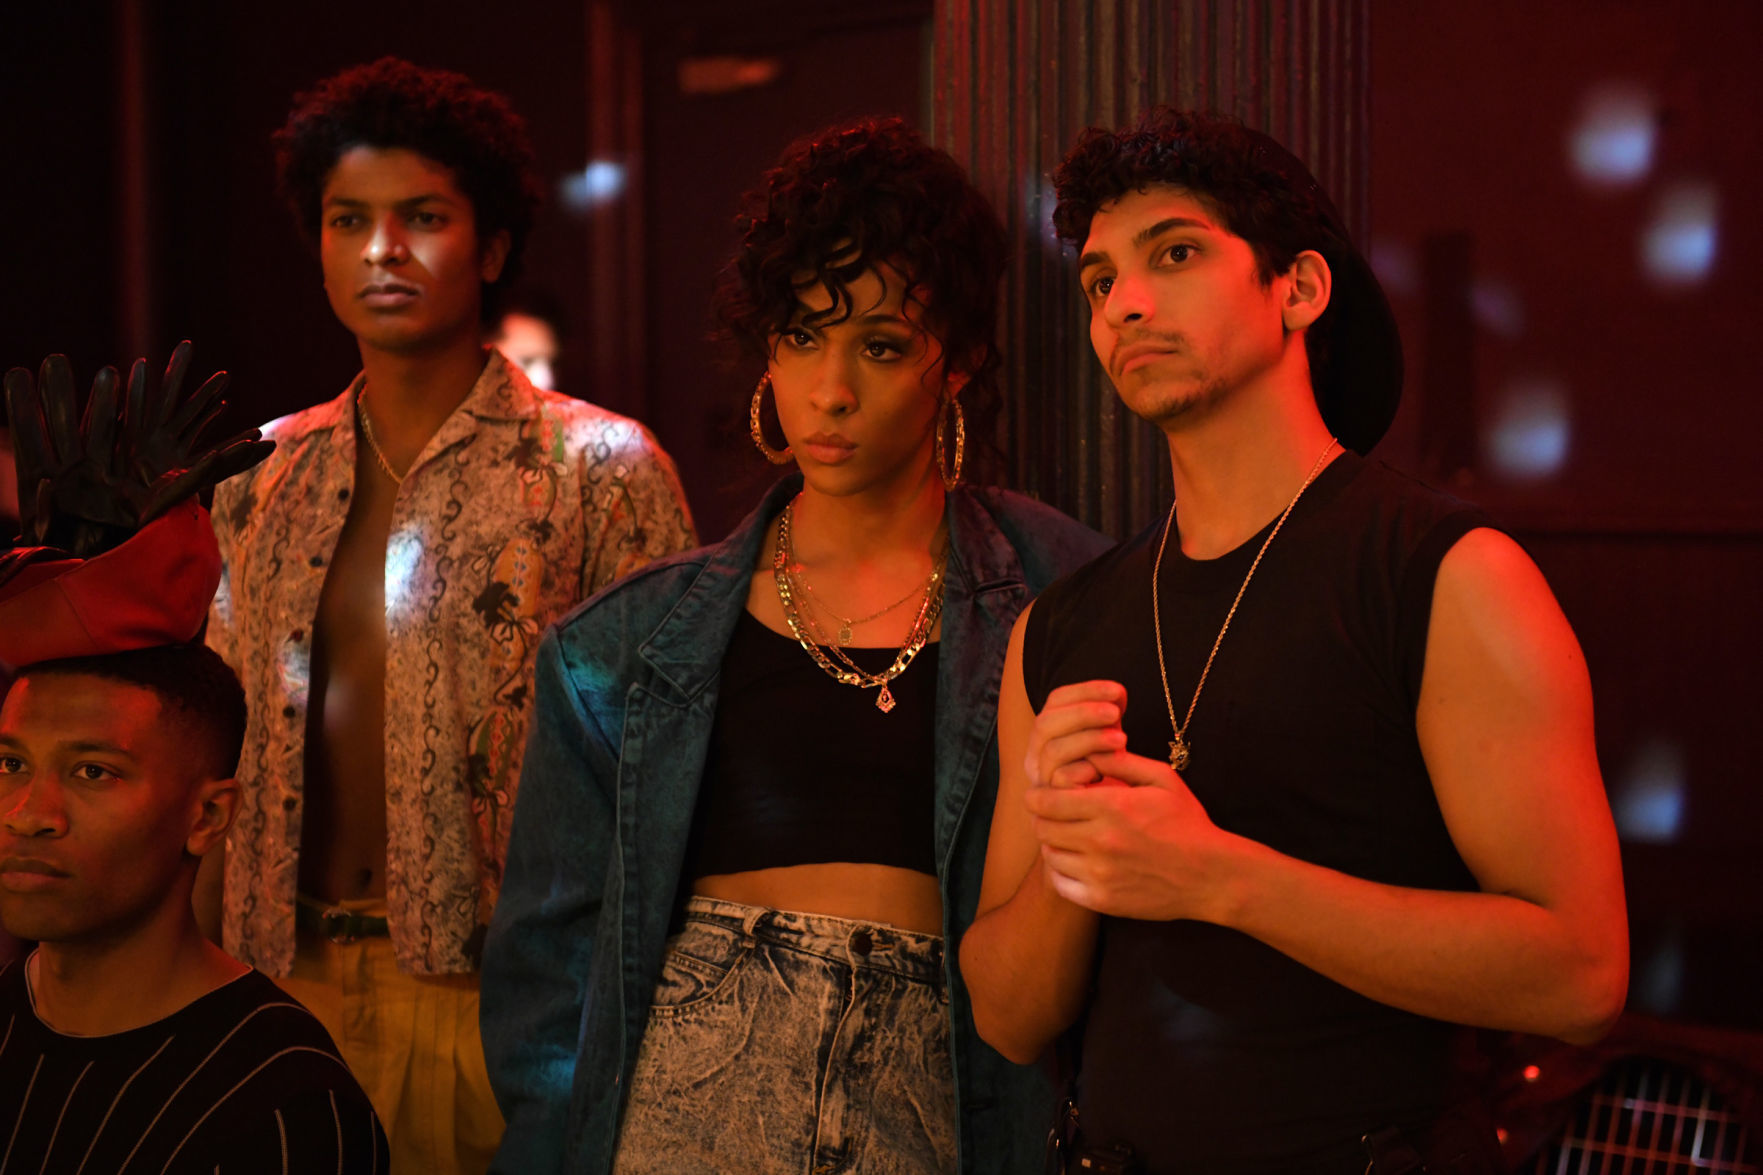 Strike a 'Pose': New FX series looks at dance culture in 1980s